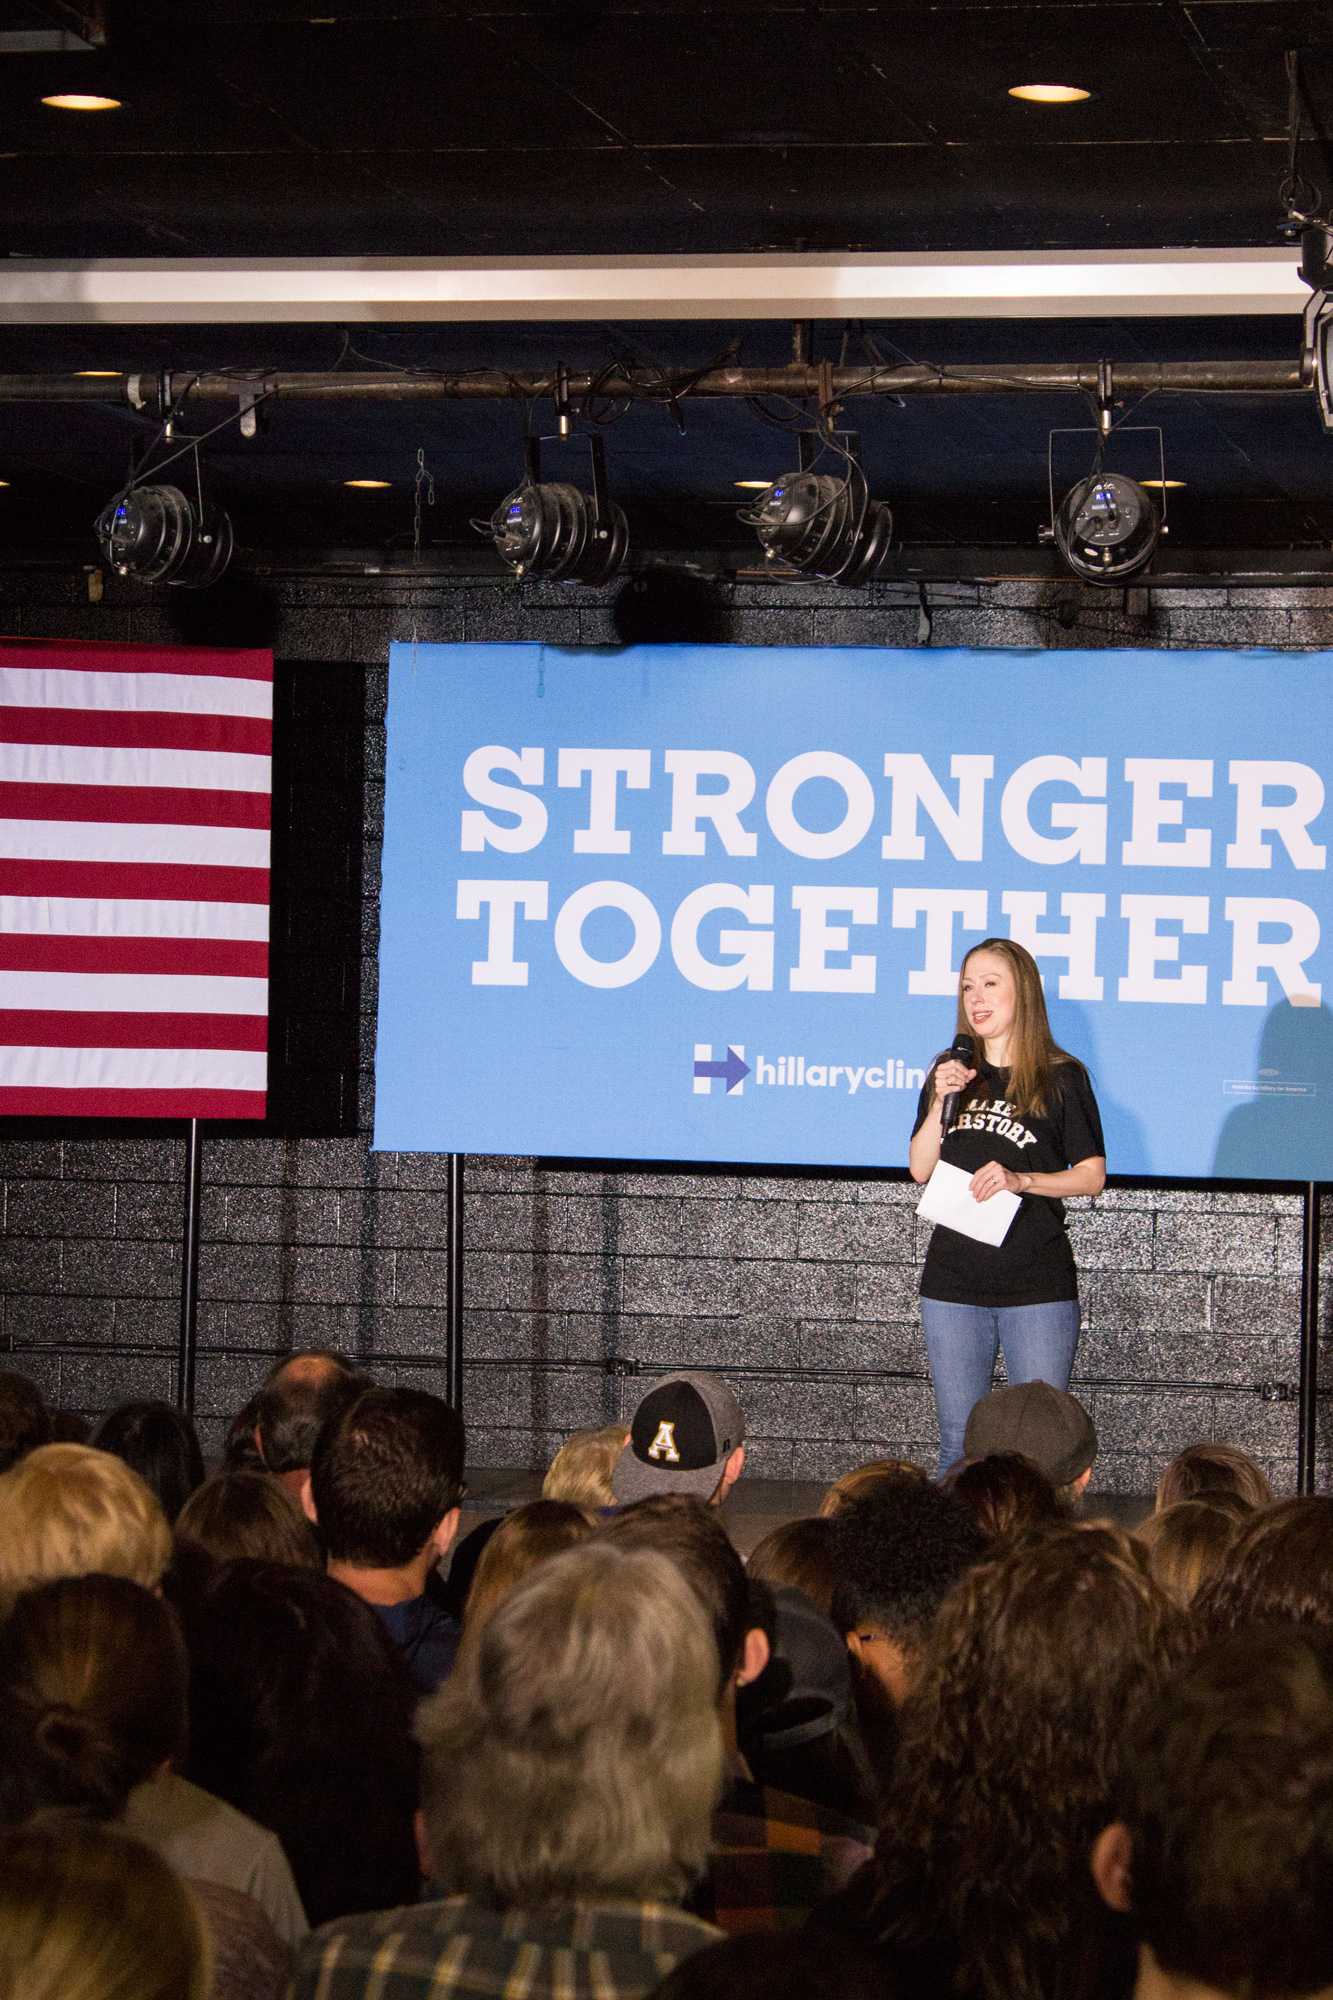 The+daughter+of+Hillary+Clinton%2C+Chelsea+Clinton%2C+talks+about+her+moms+campaign+and+answers+audience+questions.+Mrs.+Clinton+came+to+Legends+on+Thursday%2C+October+27th+in+order+to+persuade+people+to+go+out+and+vote+early.+550+people+in+total+came+out+to+the+rally.